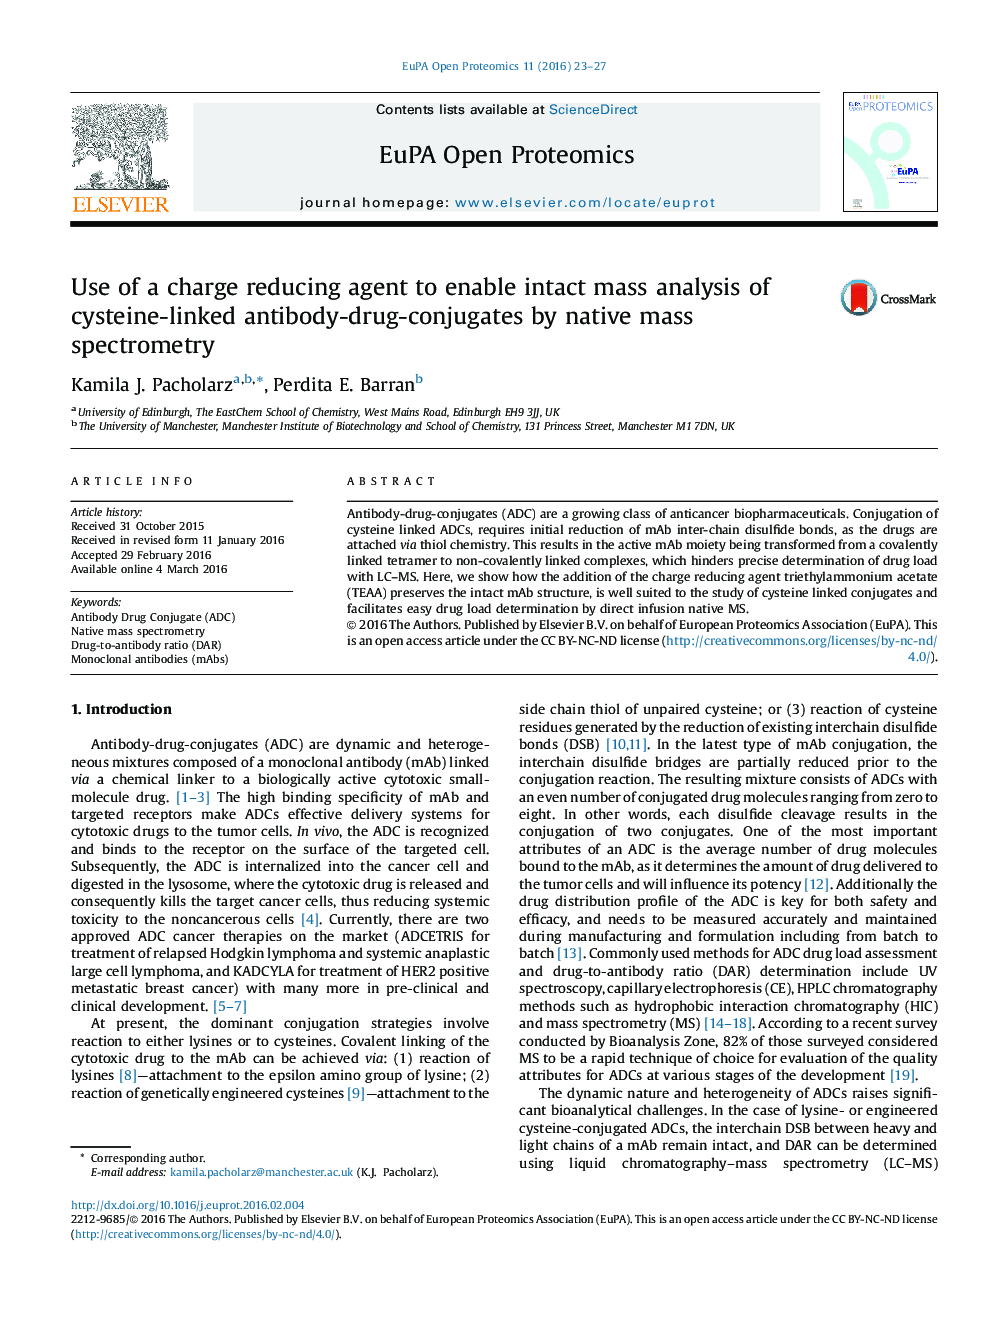 Use of a charge reducing agent to enable intact mass analysis of cysteine-linked antibody-drug-conjugates by native mass spectrometry